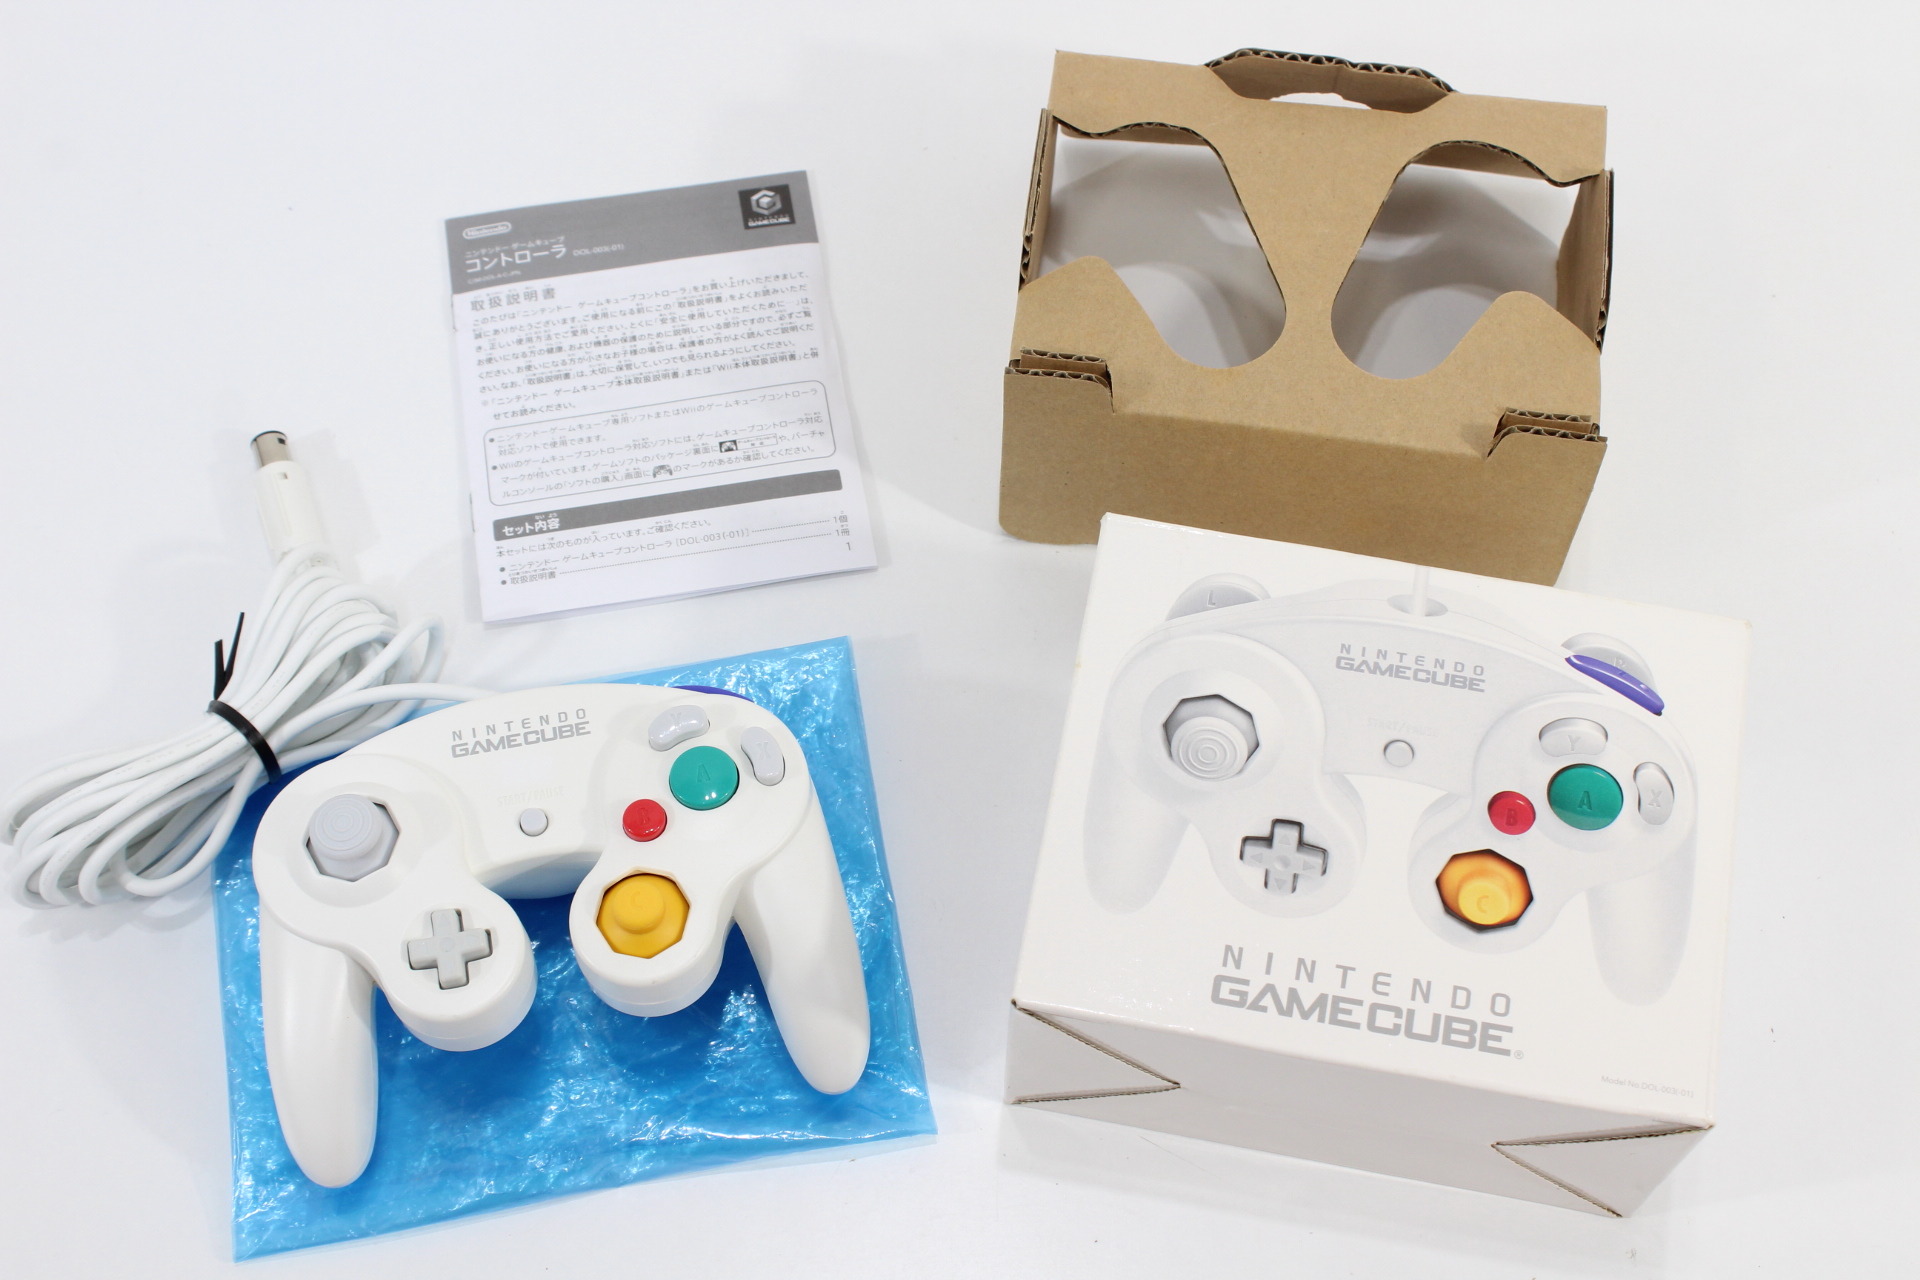 Official Nintendo Gamecube Controller Boxed White T3 OEM GC (B)